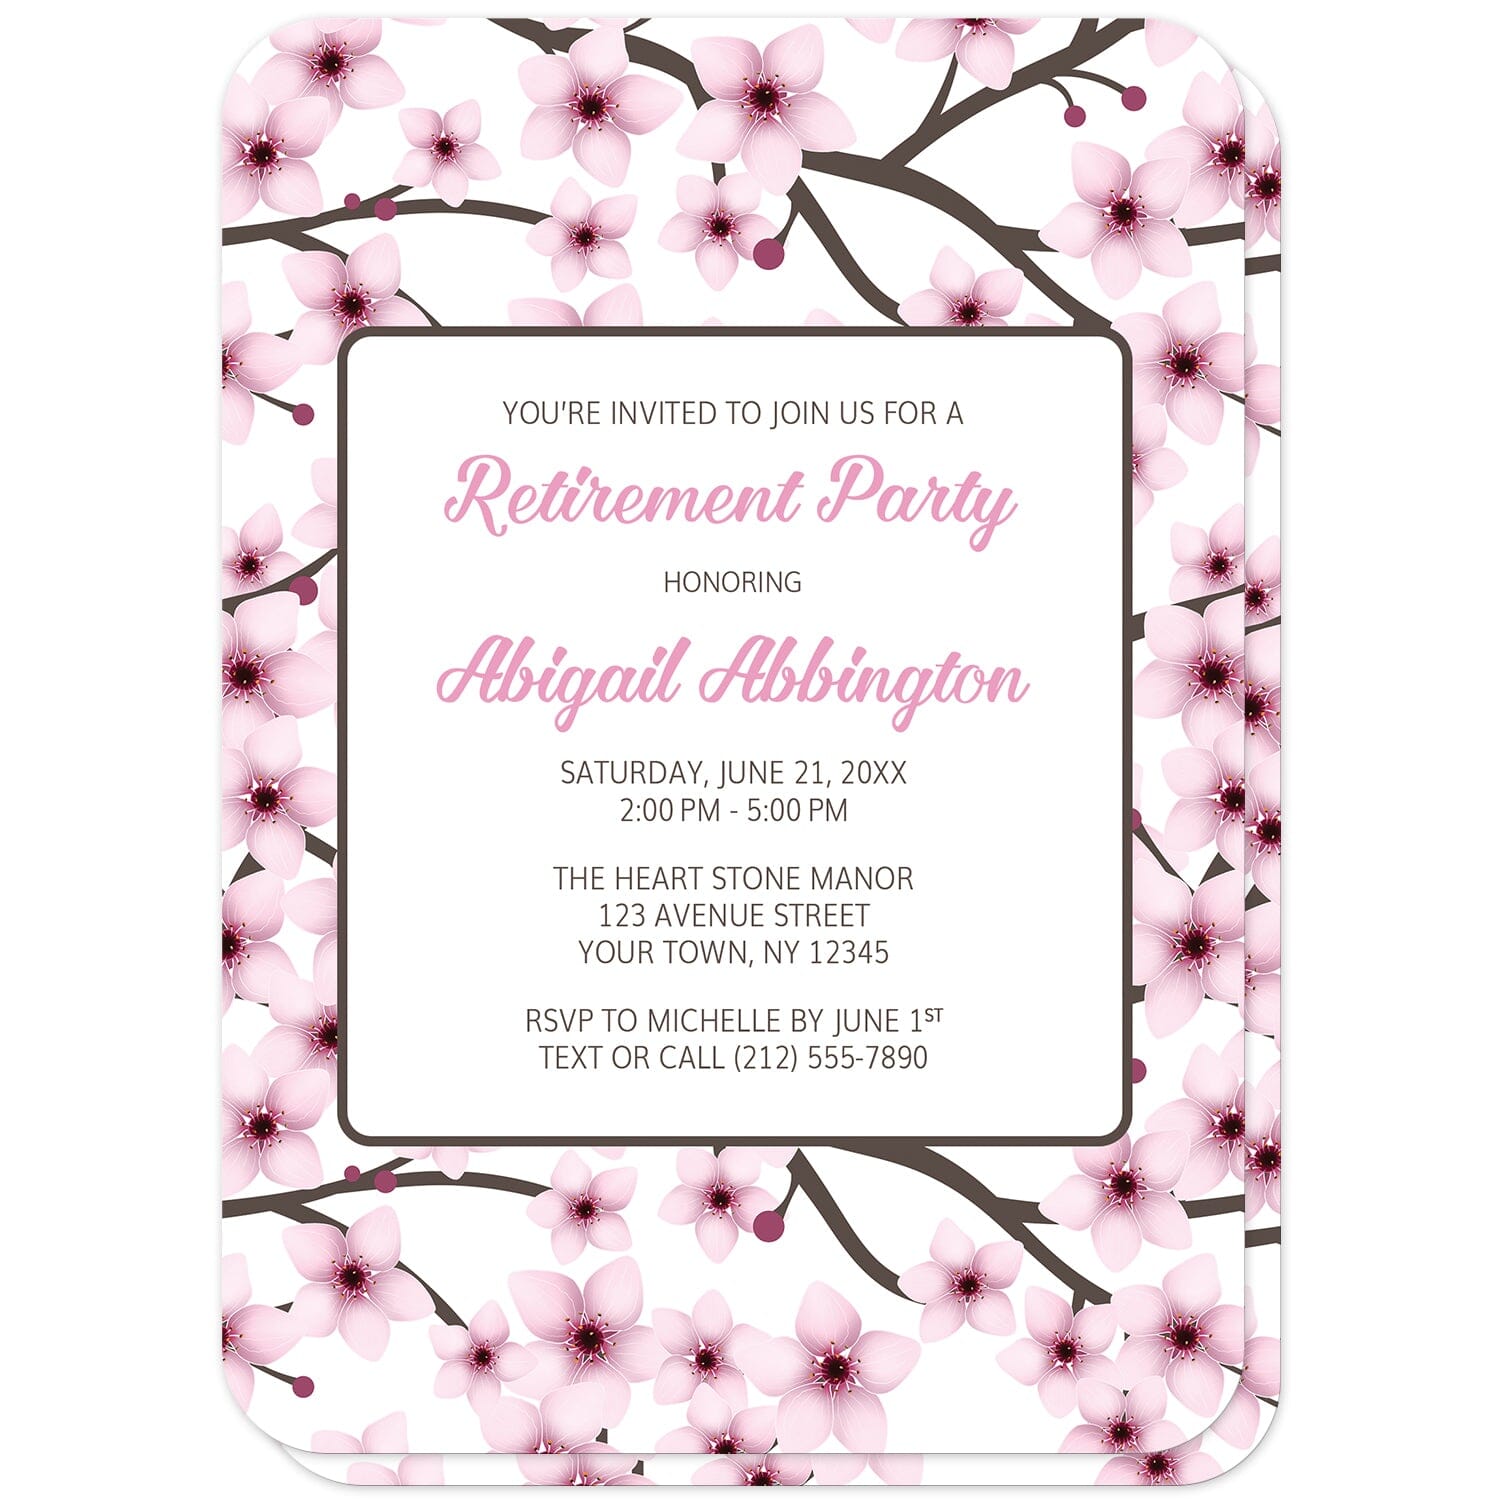 Cherry Blossom Retirement Party Invitations (front with rounded corners) at Artistically Invited. Beautiful cherry blossom retirement party invitations designed with a gorgeous floral pattern of pink cherry blossom branches on both sides of the invitations. Your personalized retirement party details are custom printed in pink and brown on white in the center area over the cherry blossoms pattern on the front. 